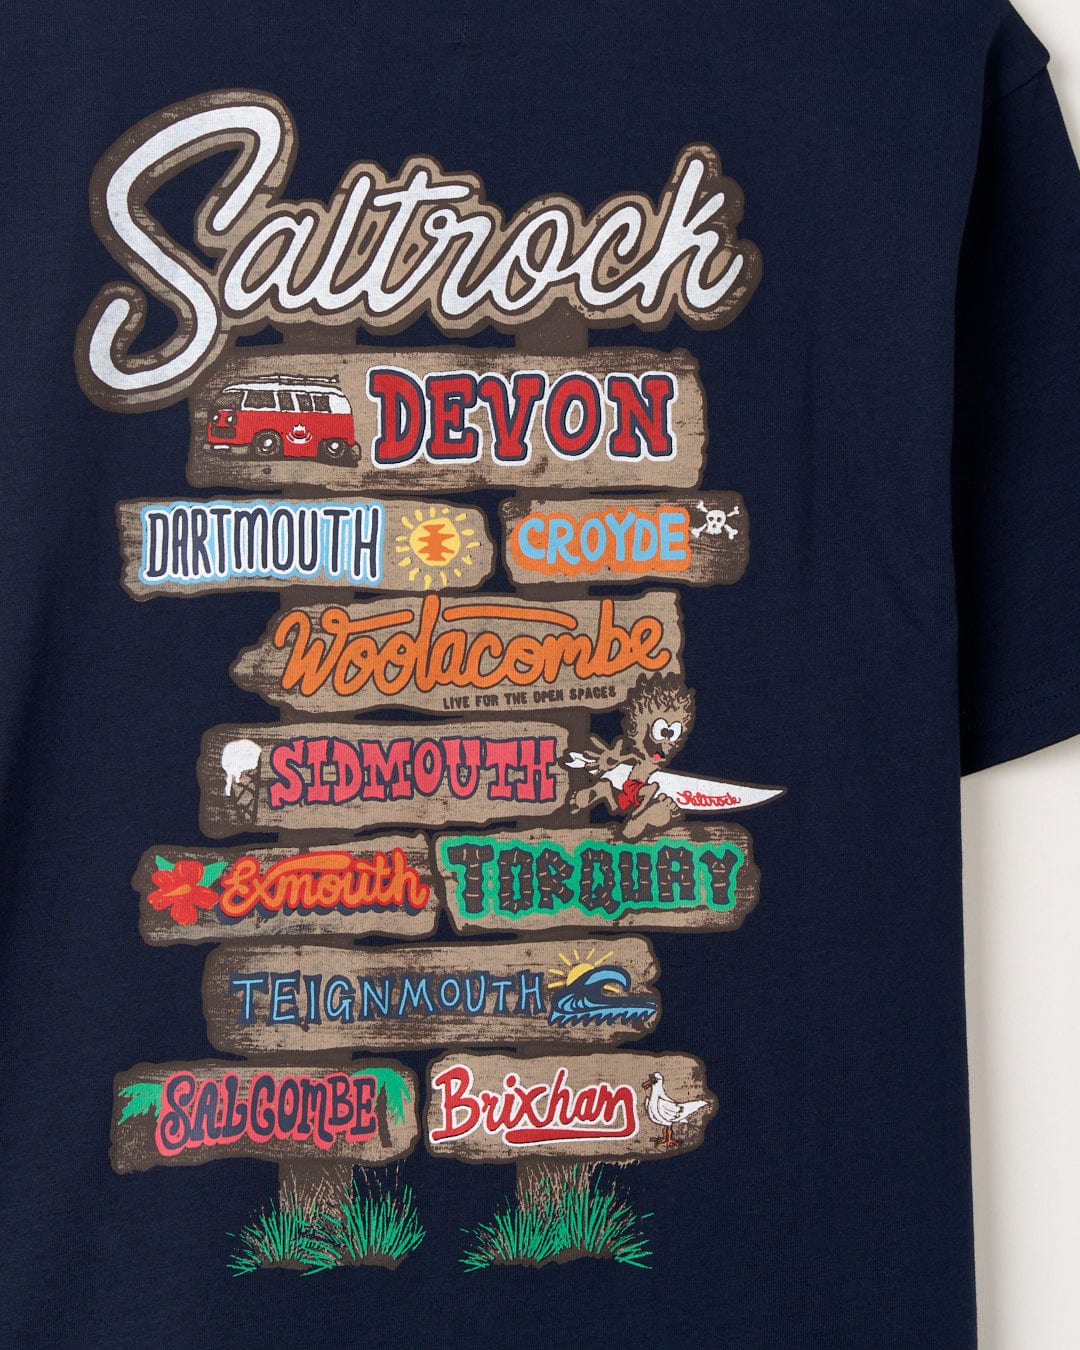 This t-shirt features the Saltrock branding, inspired by Beach Signs Devon, with a peached soft hand feel.